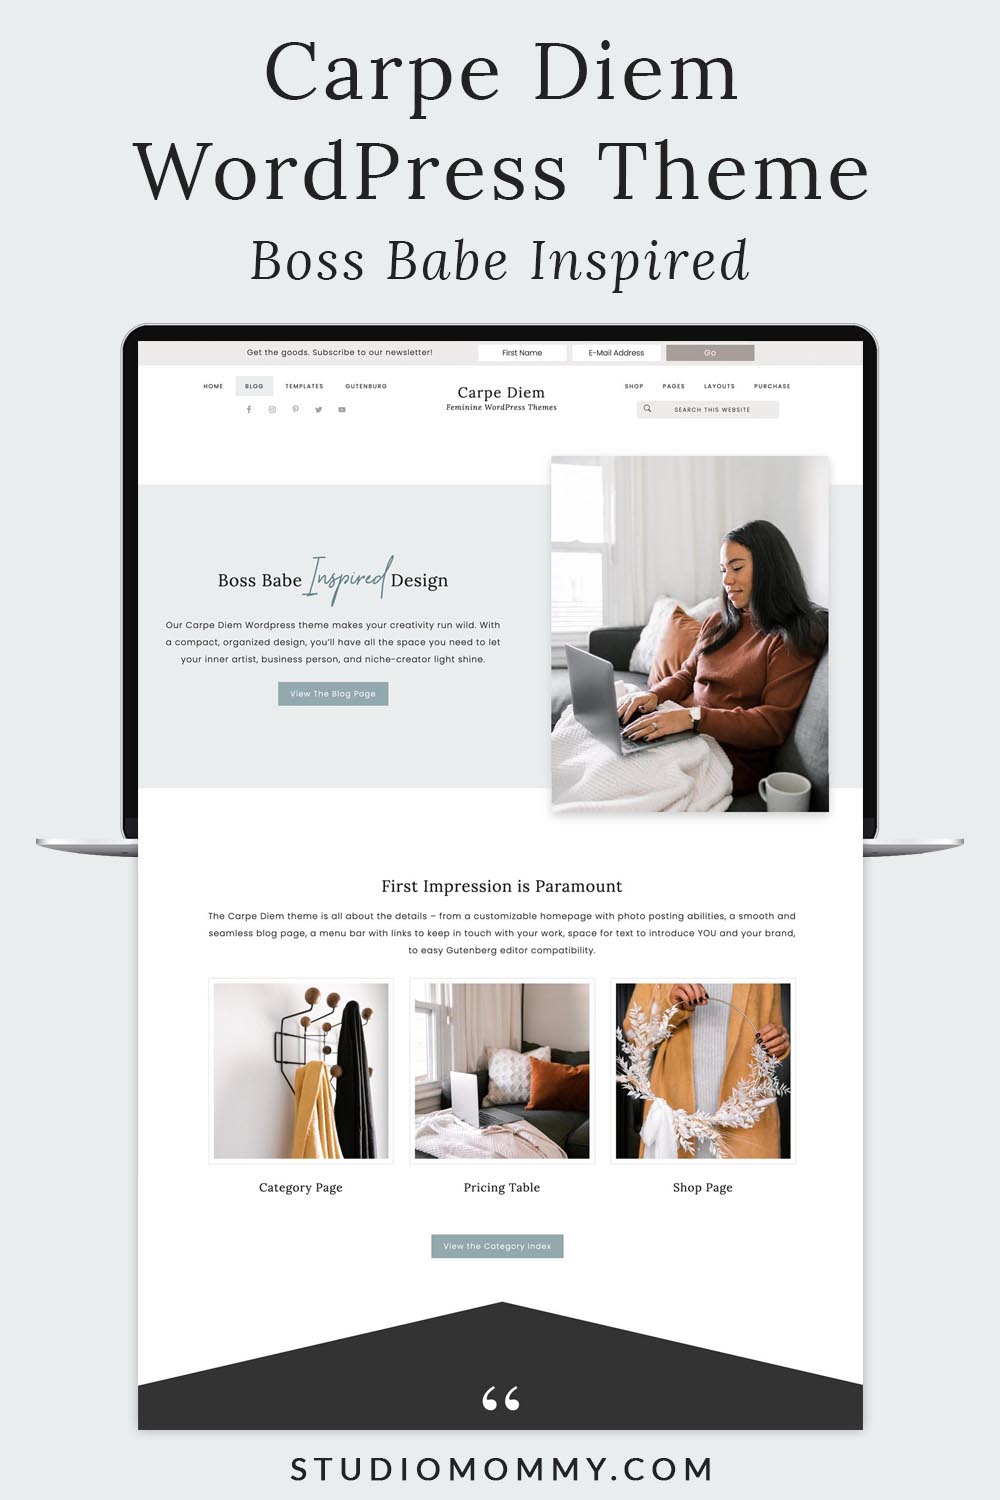 Our Carpe Diem Wordpress theme is a neat, boss-babe-inspired WordPress theme that makes your creativity run wild. With a compact, organized design, you’ll have all the space you need to let your inner artist, business person, and niche-creator light shine.